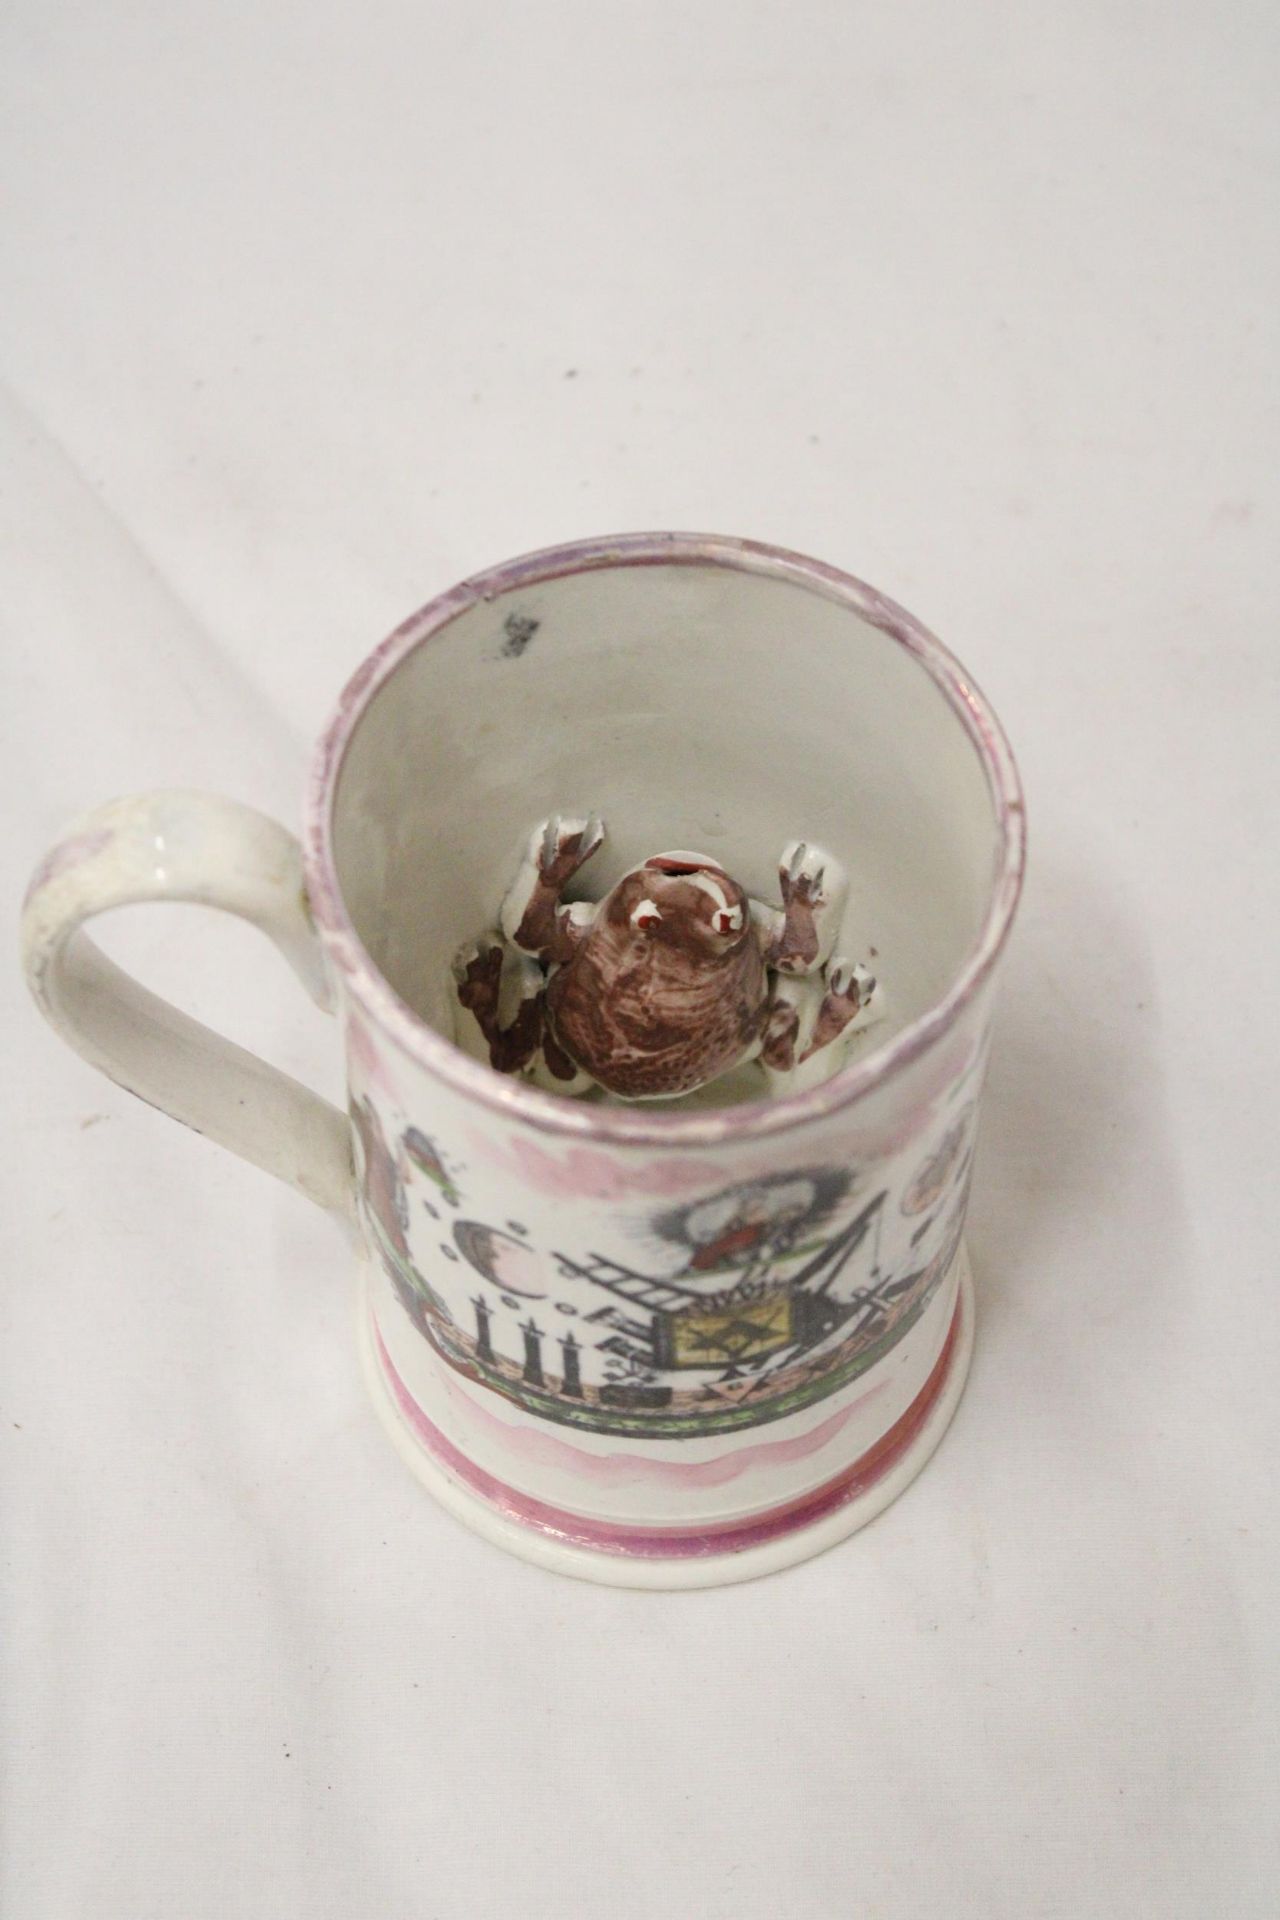 A 19TH CENTURY STAFFORDSHIRE POTTERY FROG MUG WITH 'GOD SAVE THE QUEEN' EMBLEM - Image 5 of 5